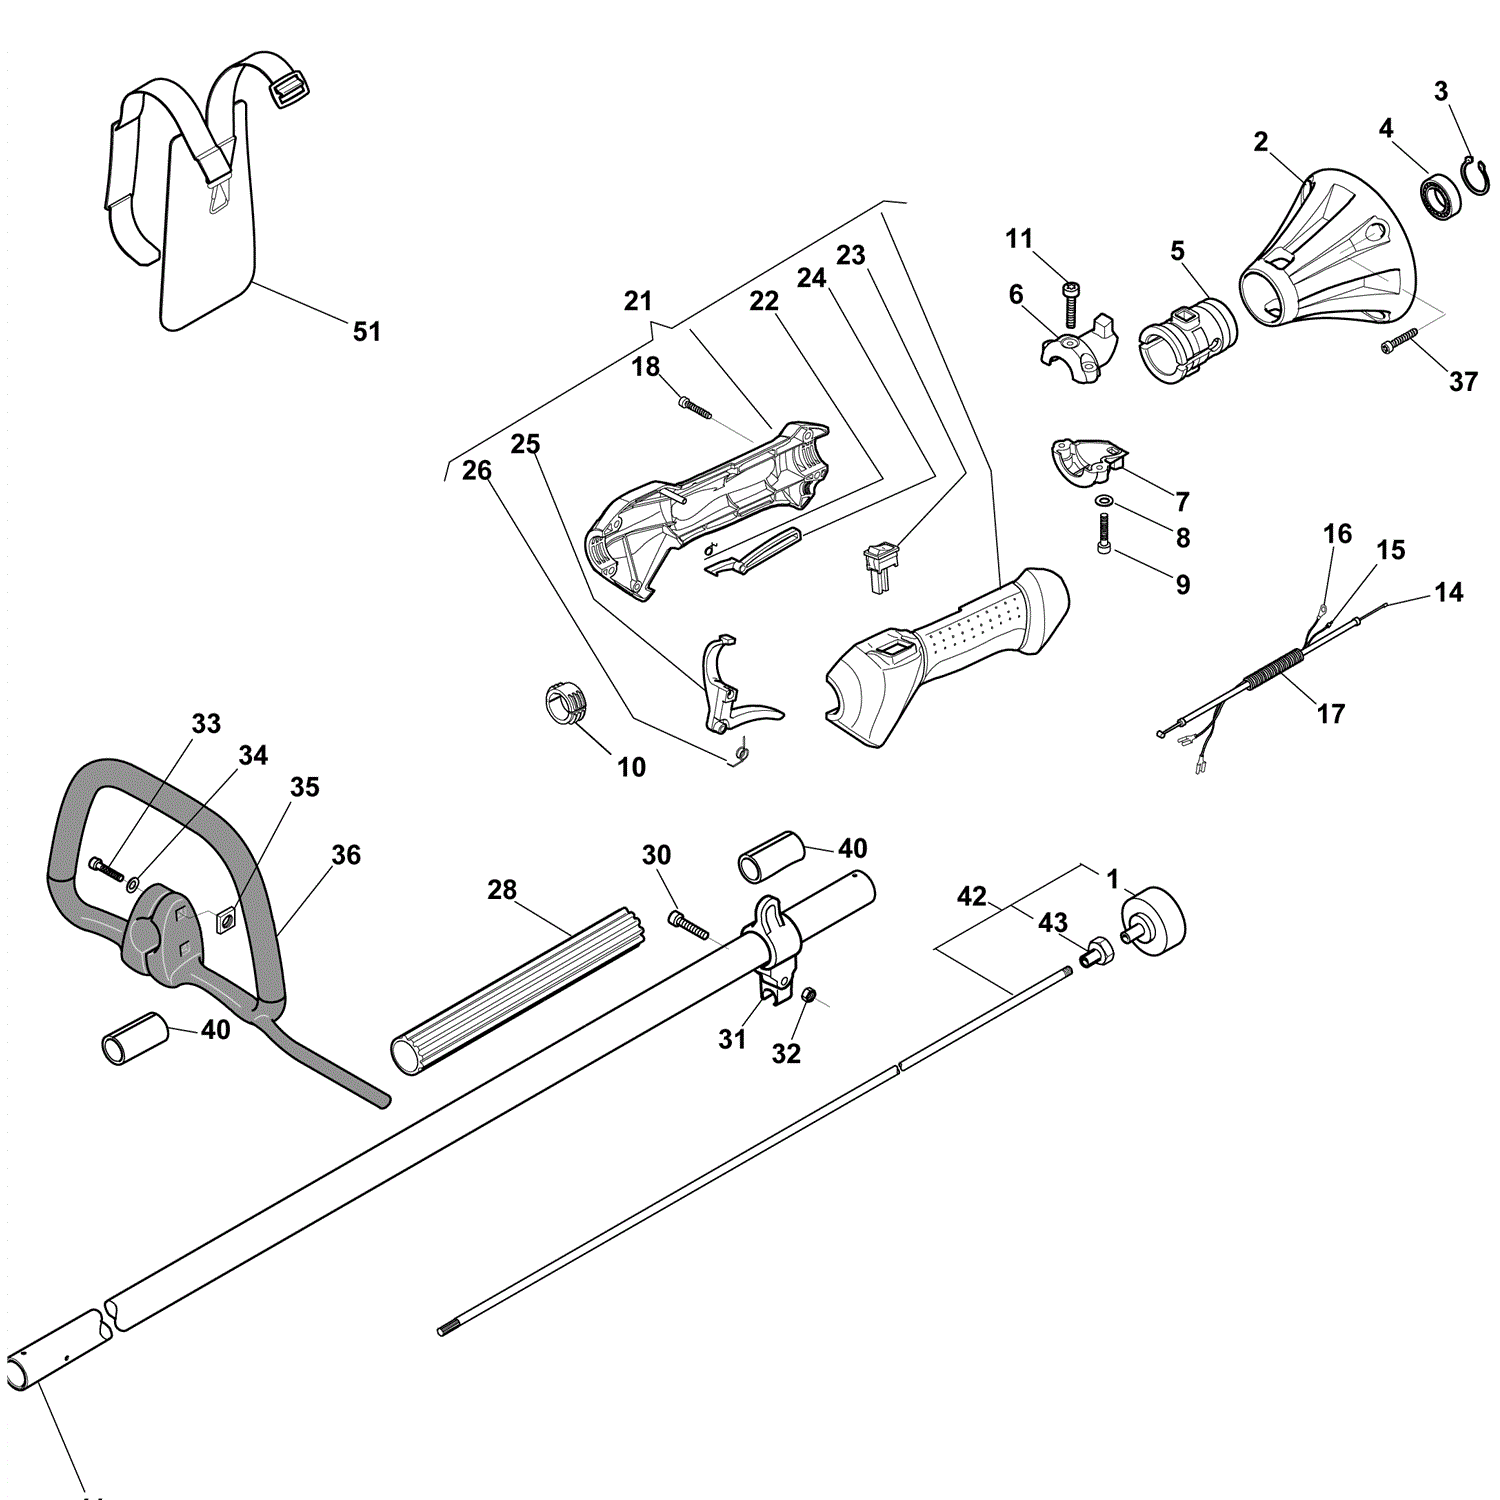 Mountfield MB2501 (2009) Parts Diagram, Page 3